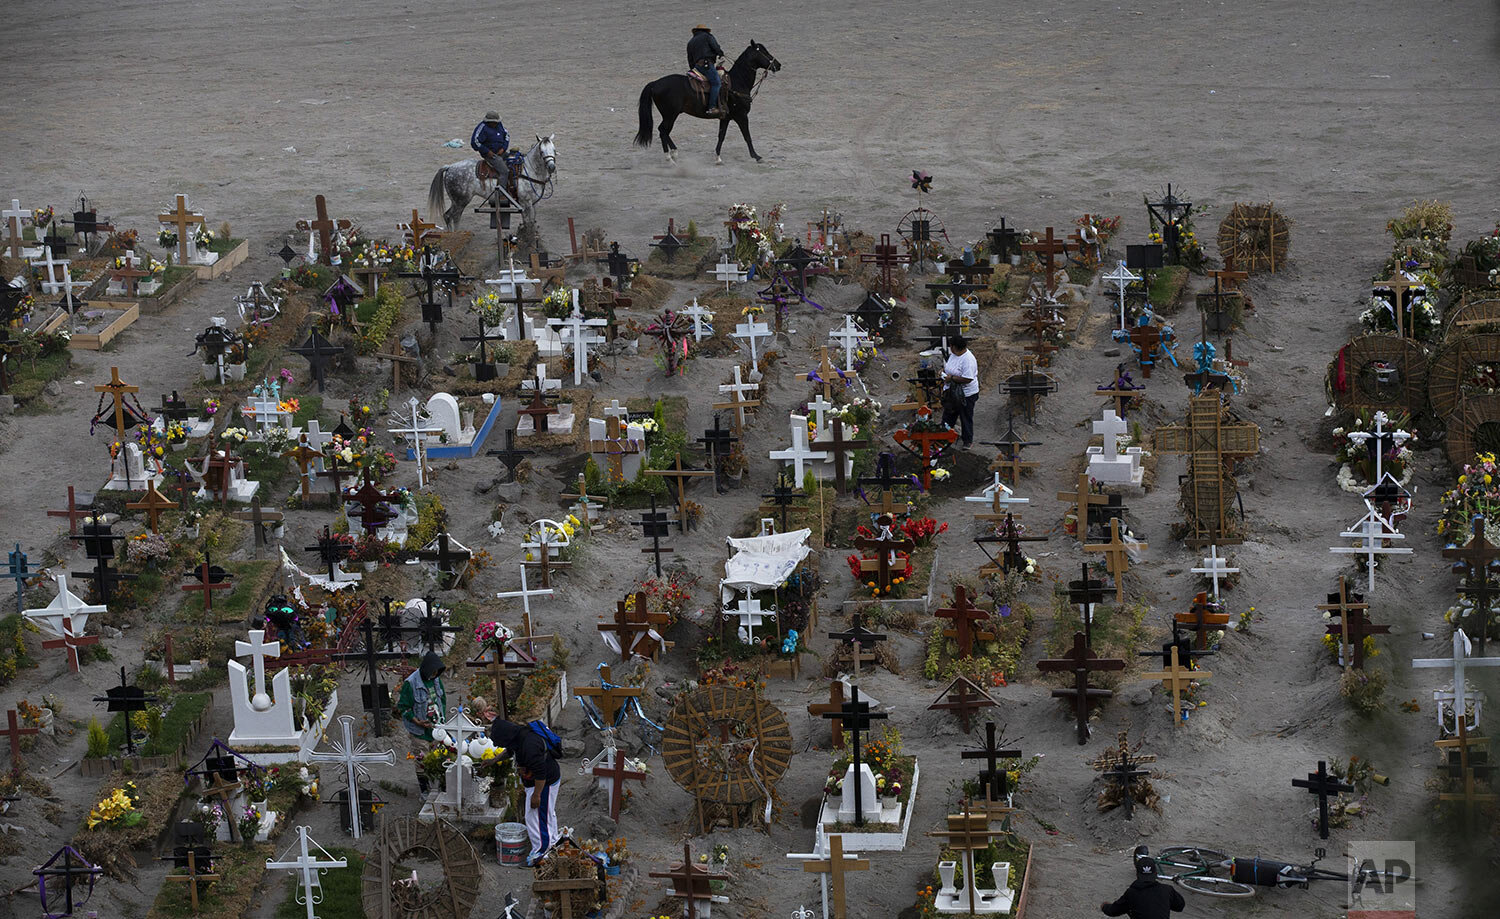  Workers ride their horses in the Valle de Chalco municipal cemetery, mostly reserved for the burials of COVID-19 victims, on the outskirts of Mexico City, Wednesday, Nov. 18, 2020. (AP Photo/Marco Ugarte) 